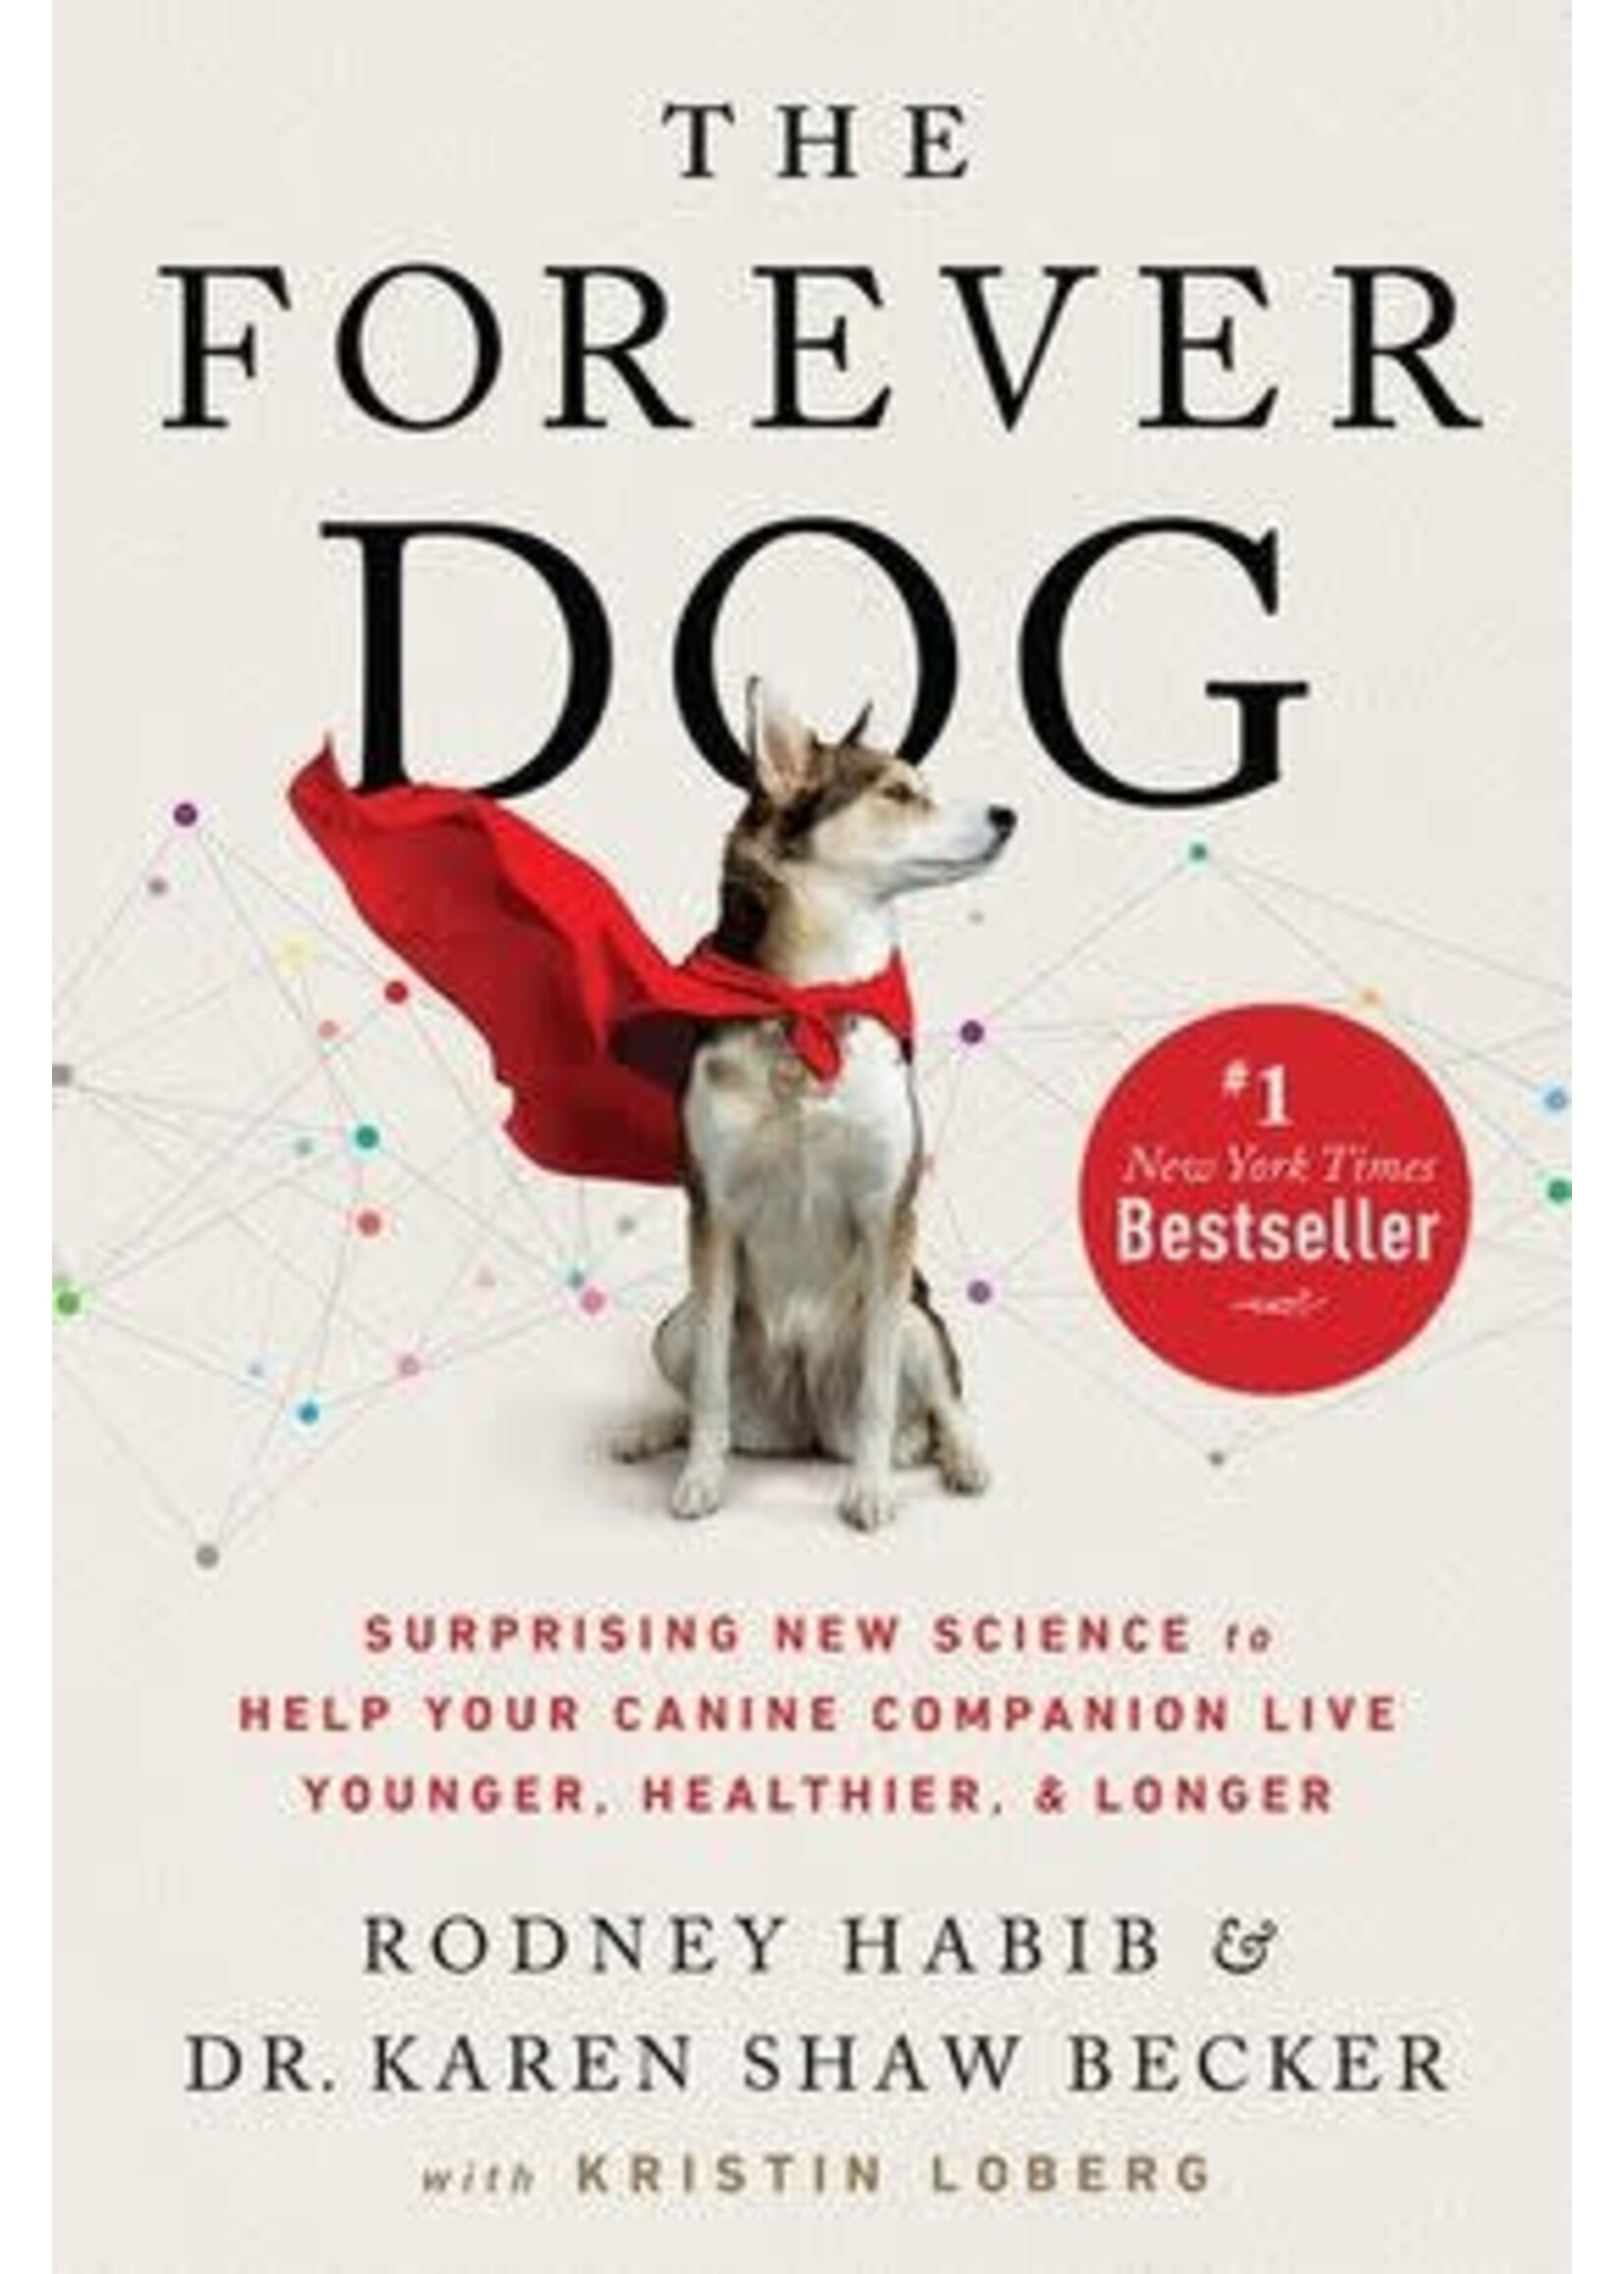 The Forever Dog Surprising: New Science to Help Your Canine Companion Live Younger, Healthier, and Longer by Rodney Habib, Karen Shaw Becker